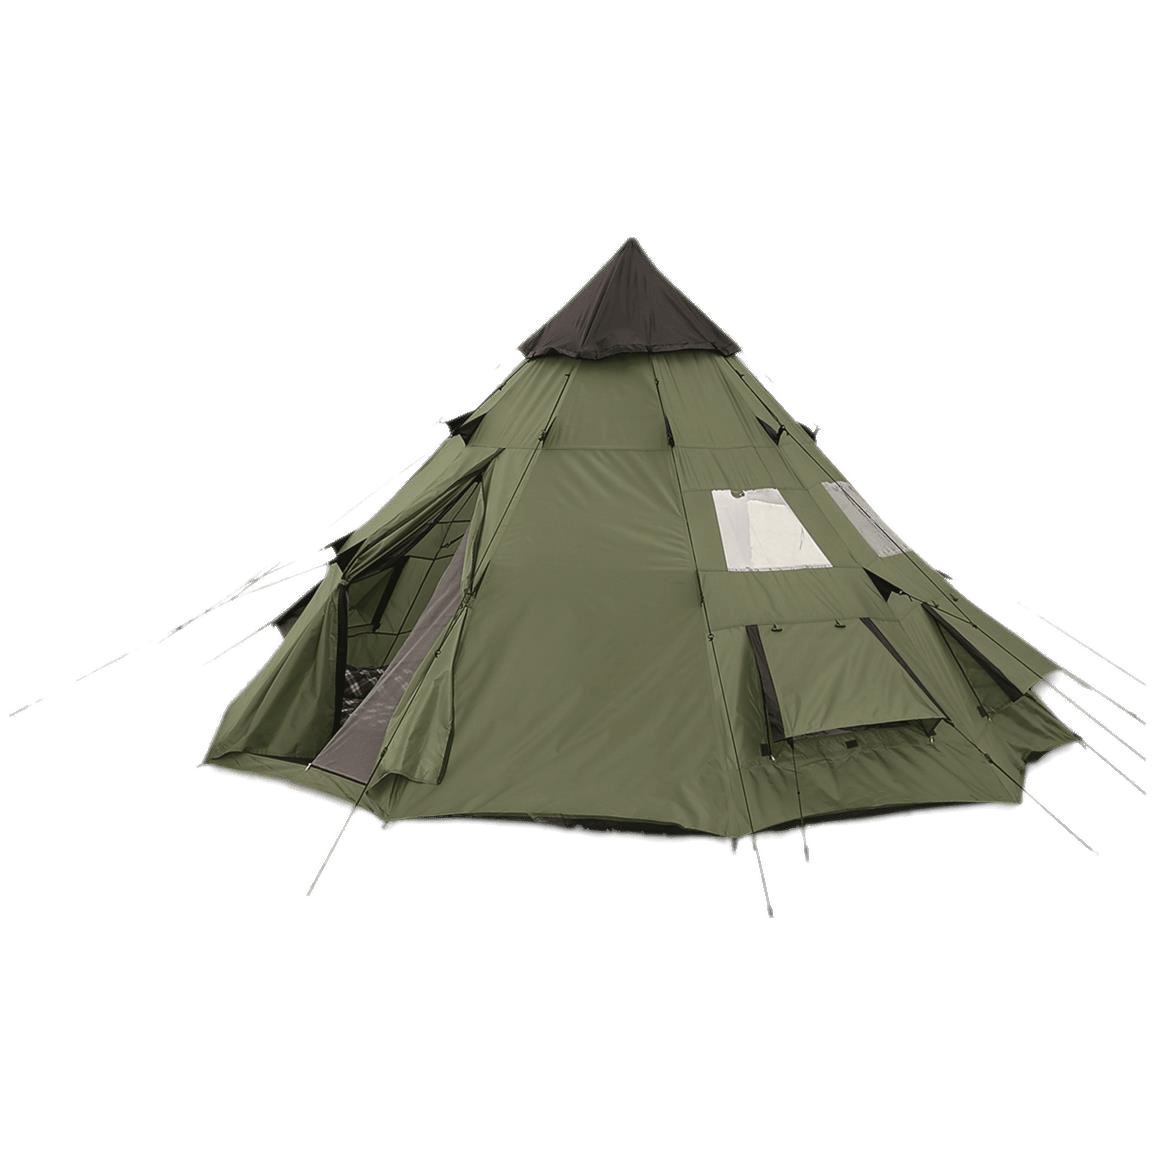 Teepee Camping Tent SVG Clip arts